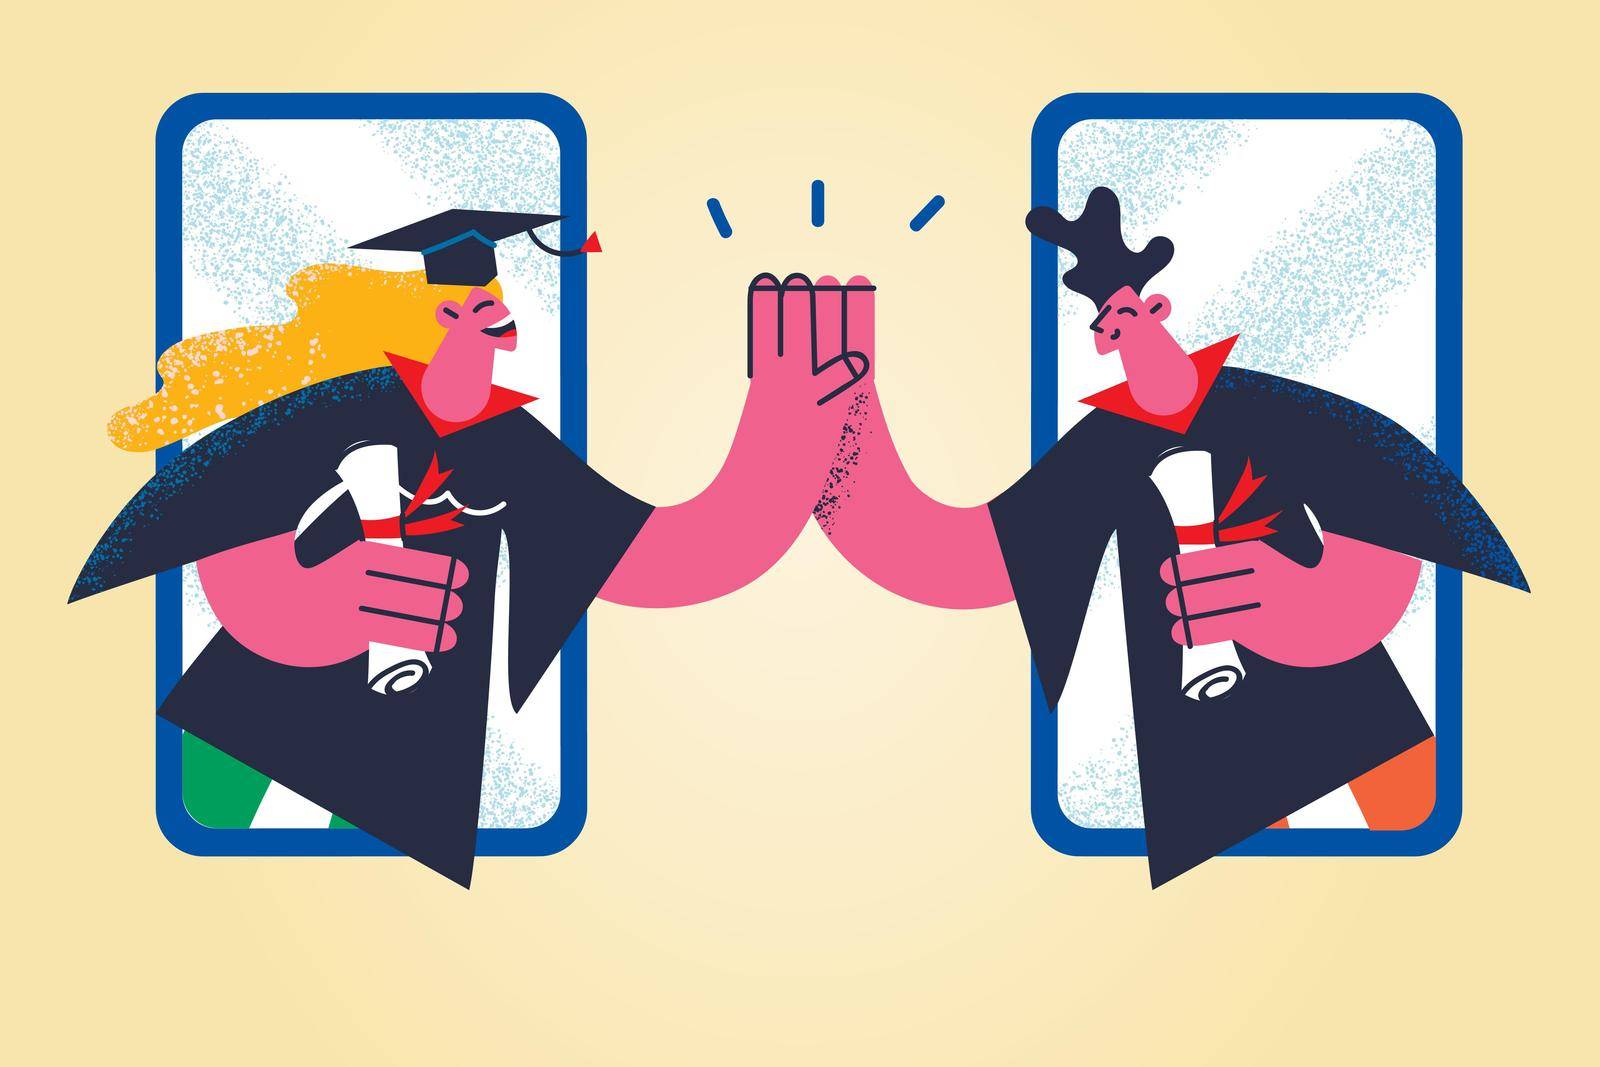 Online graduation from university concept. Young smiling graduates boy and girl cheering each other from smartphones screens feeling cheerful vector illustration